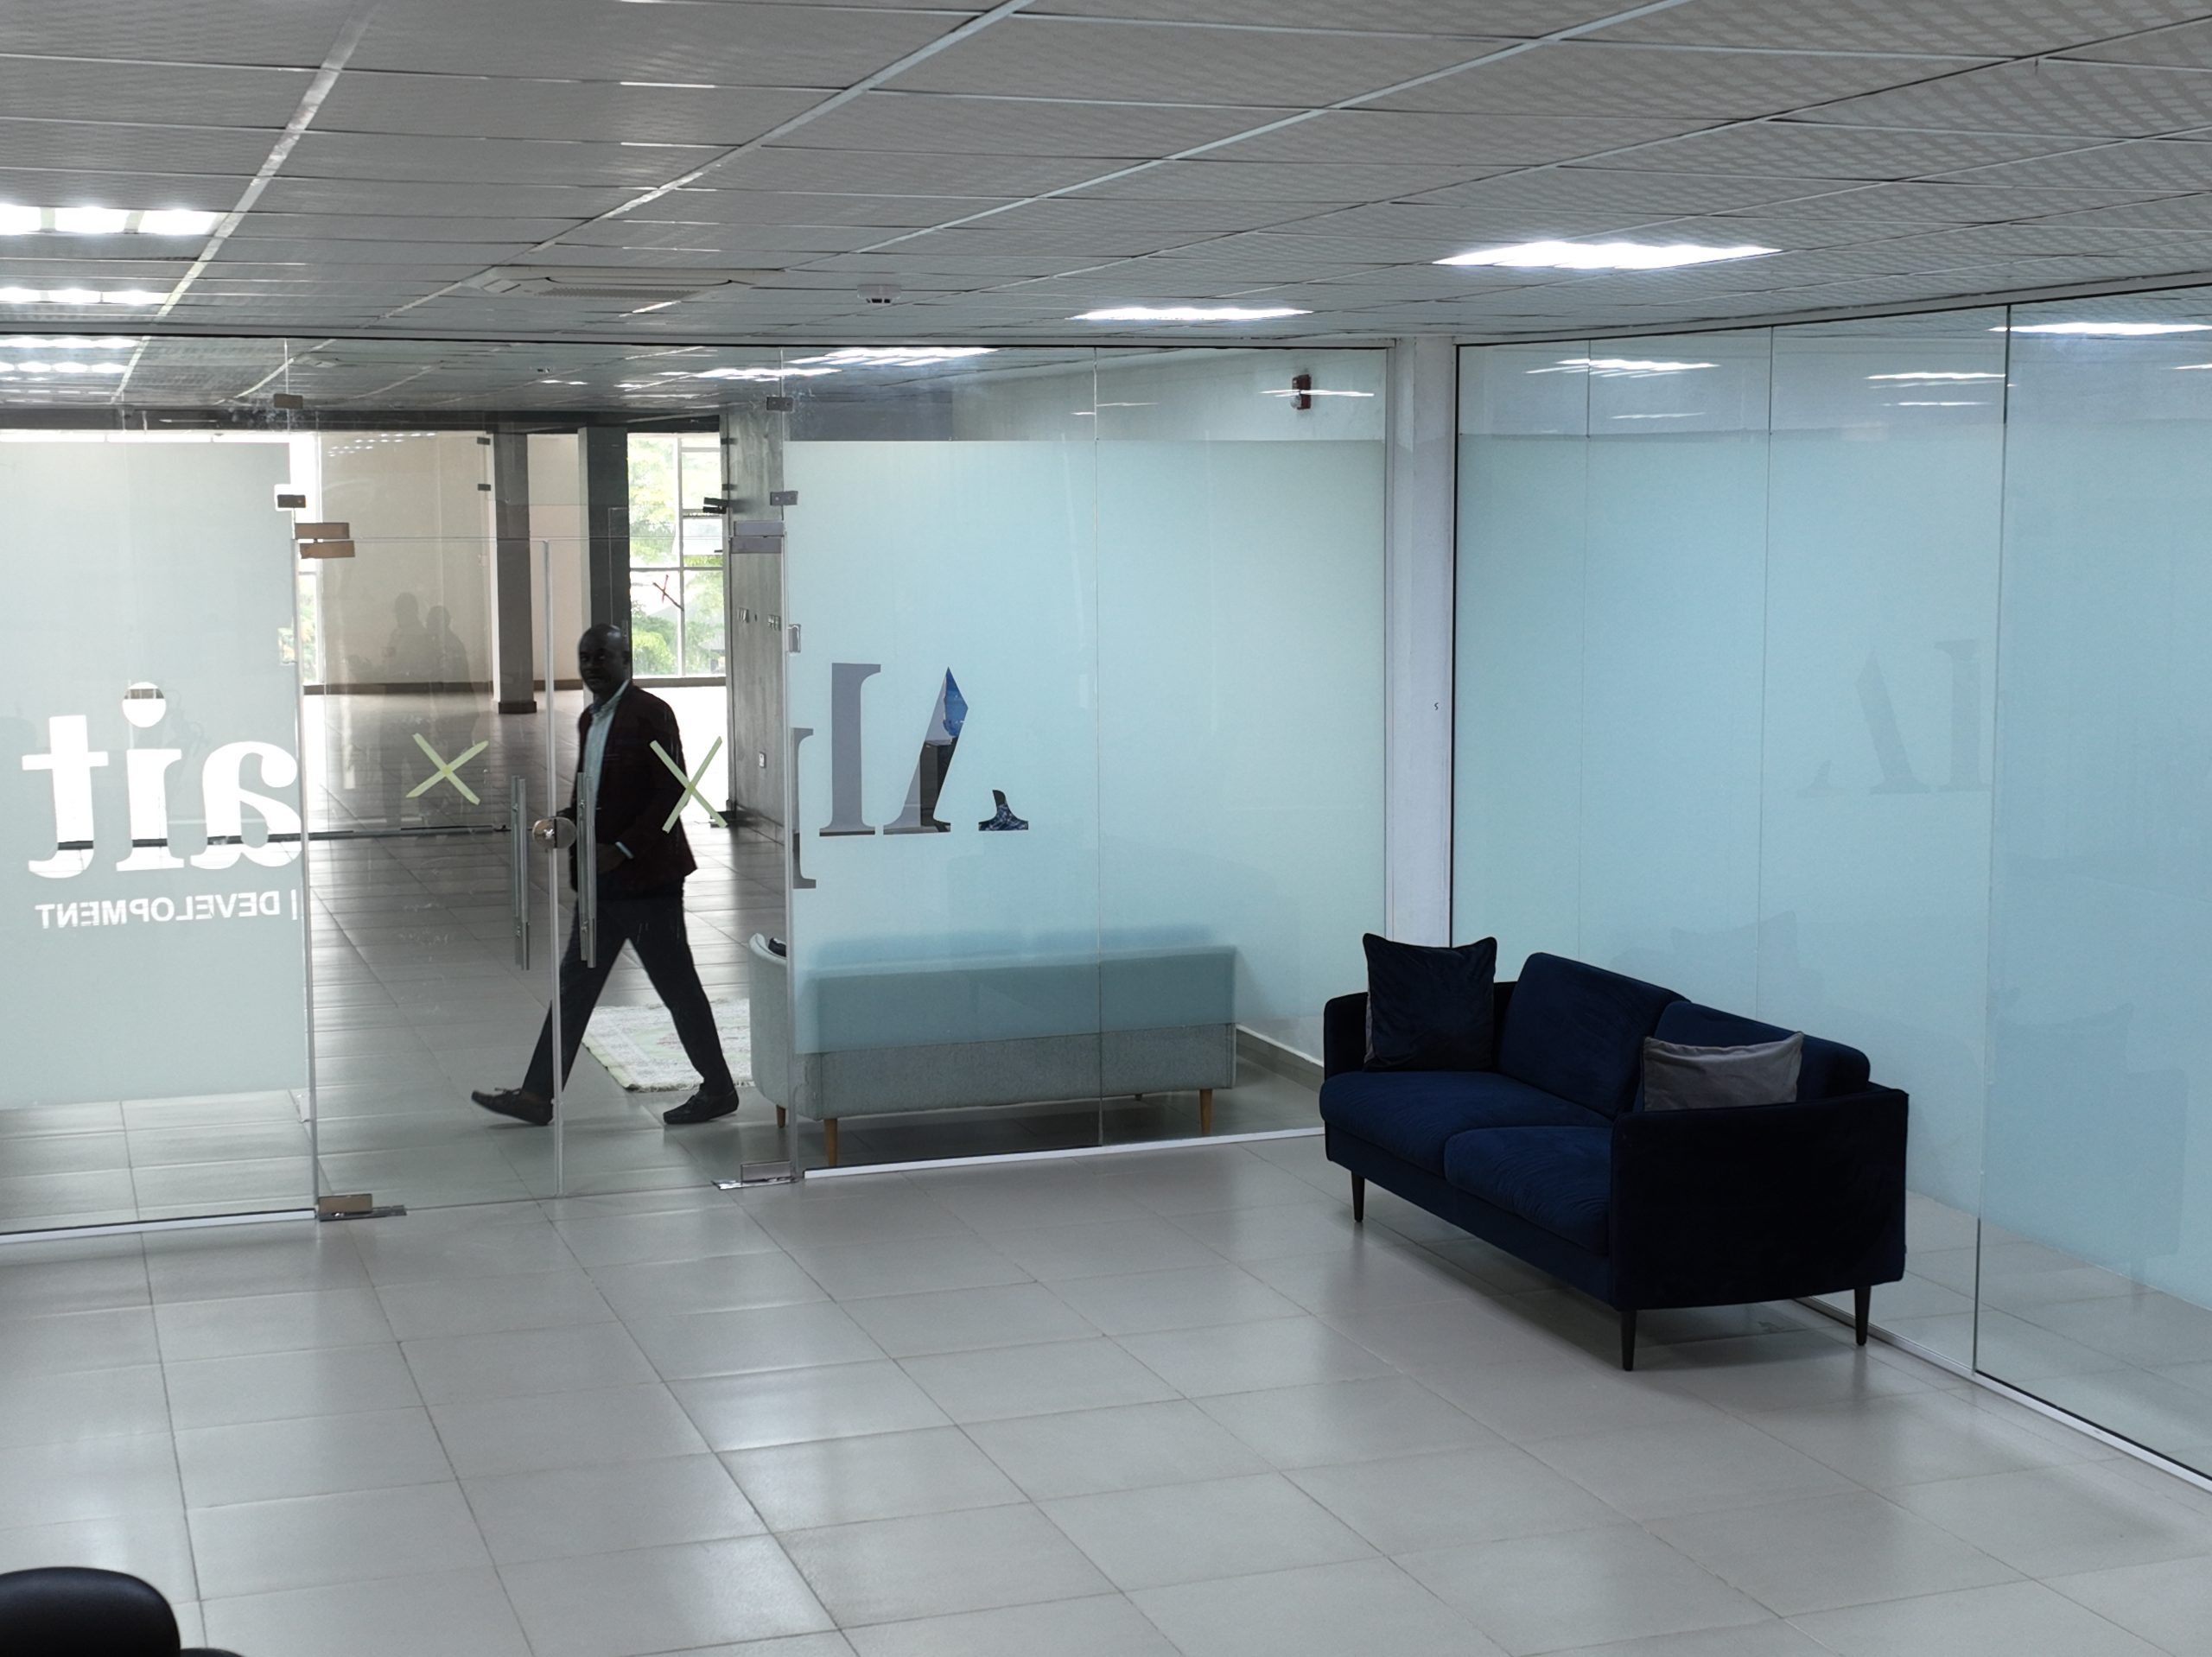 Alphabait-Office-space-1-scaled.jpg